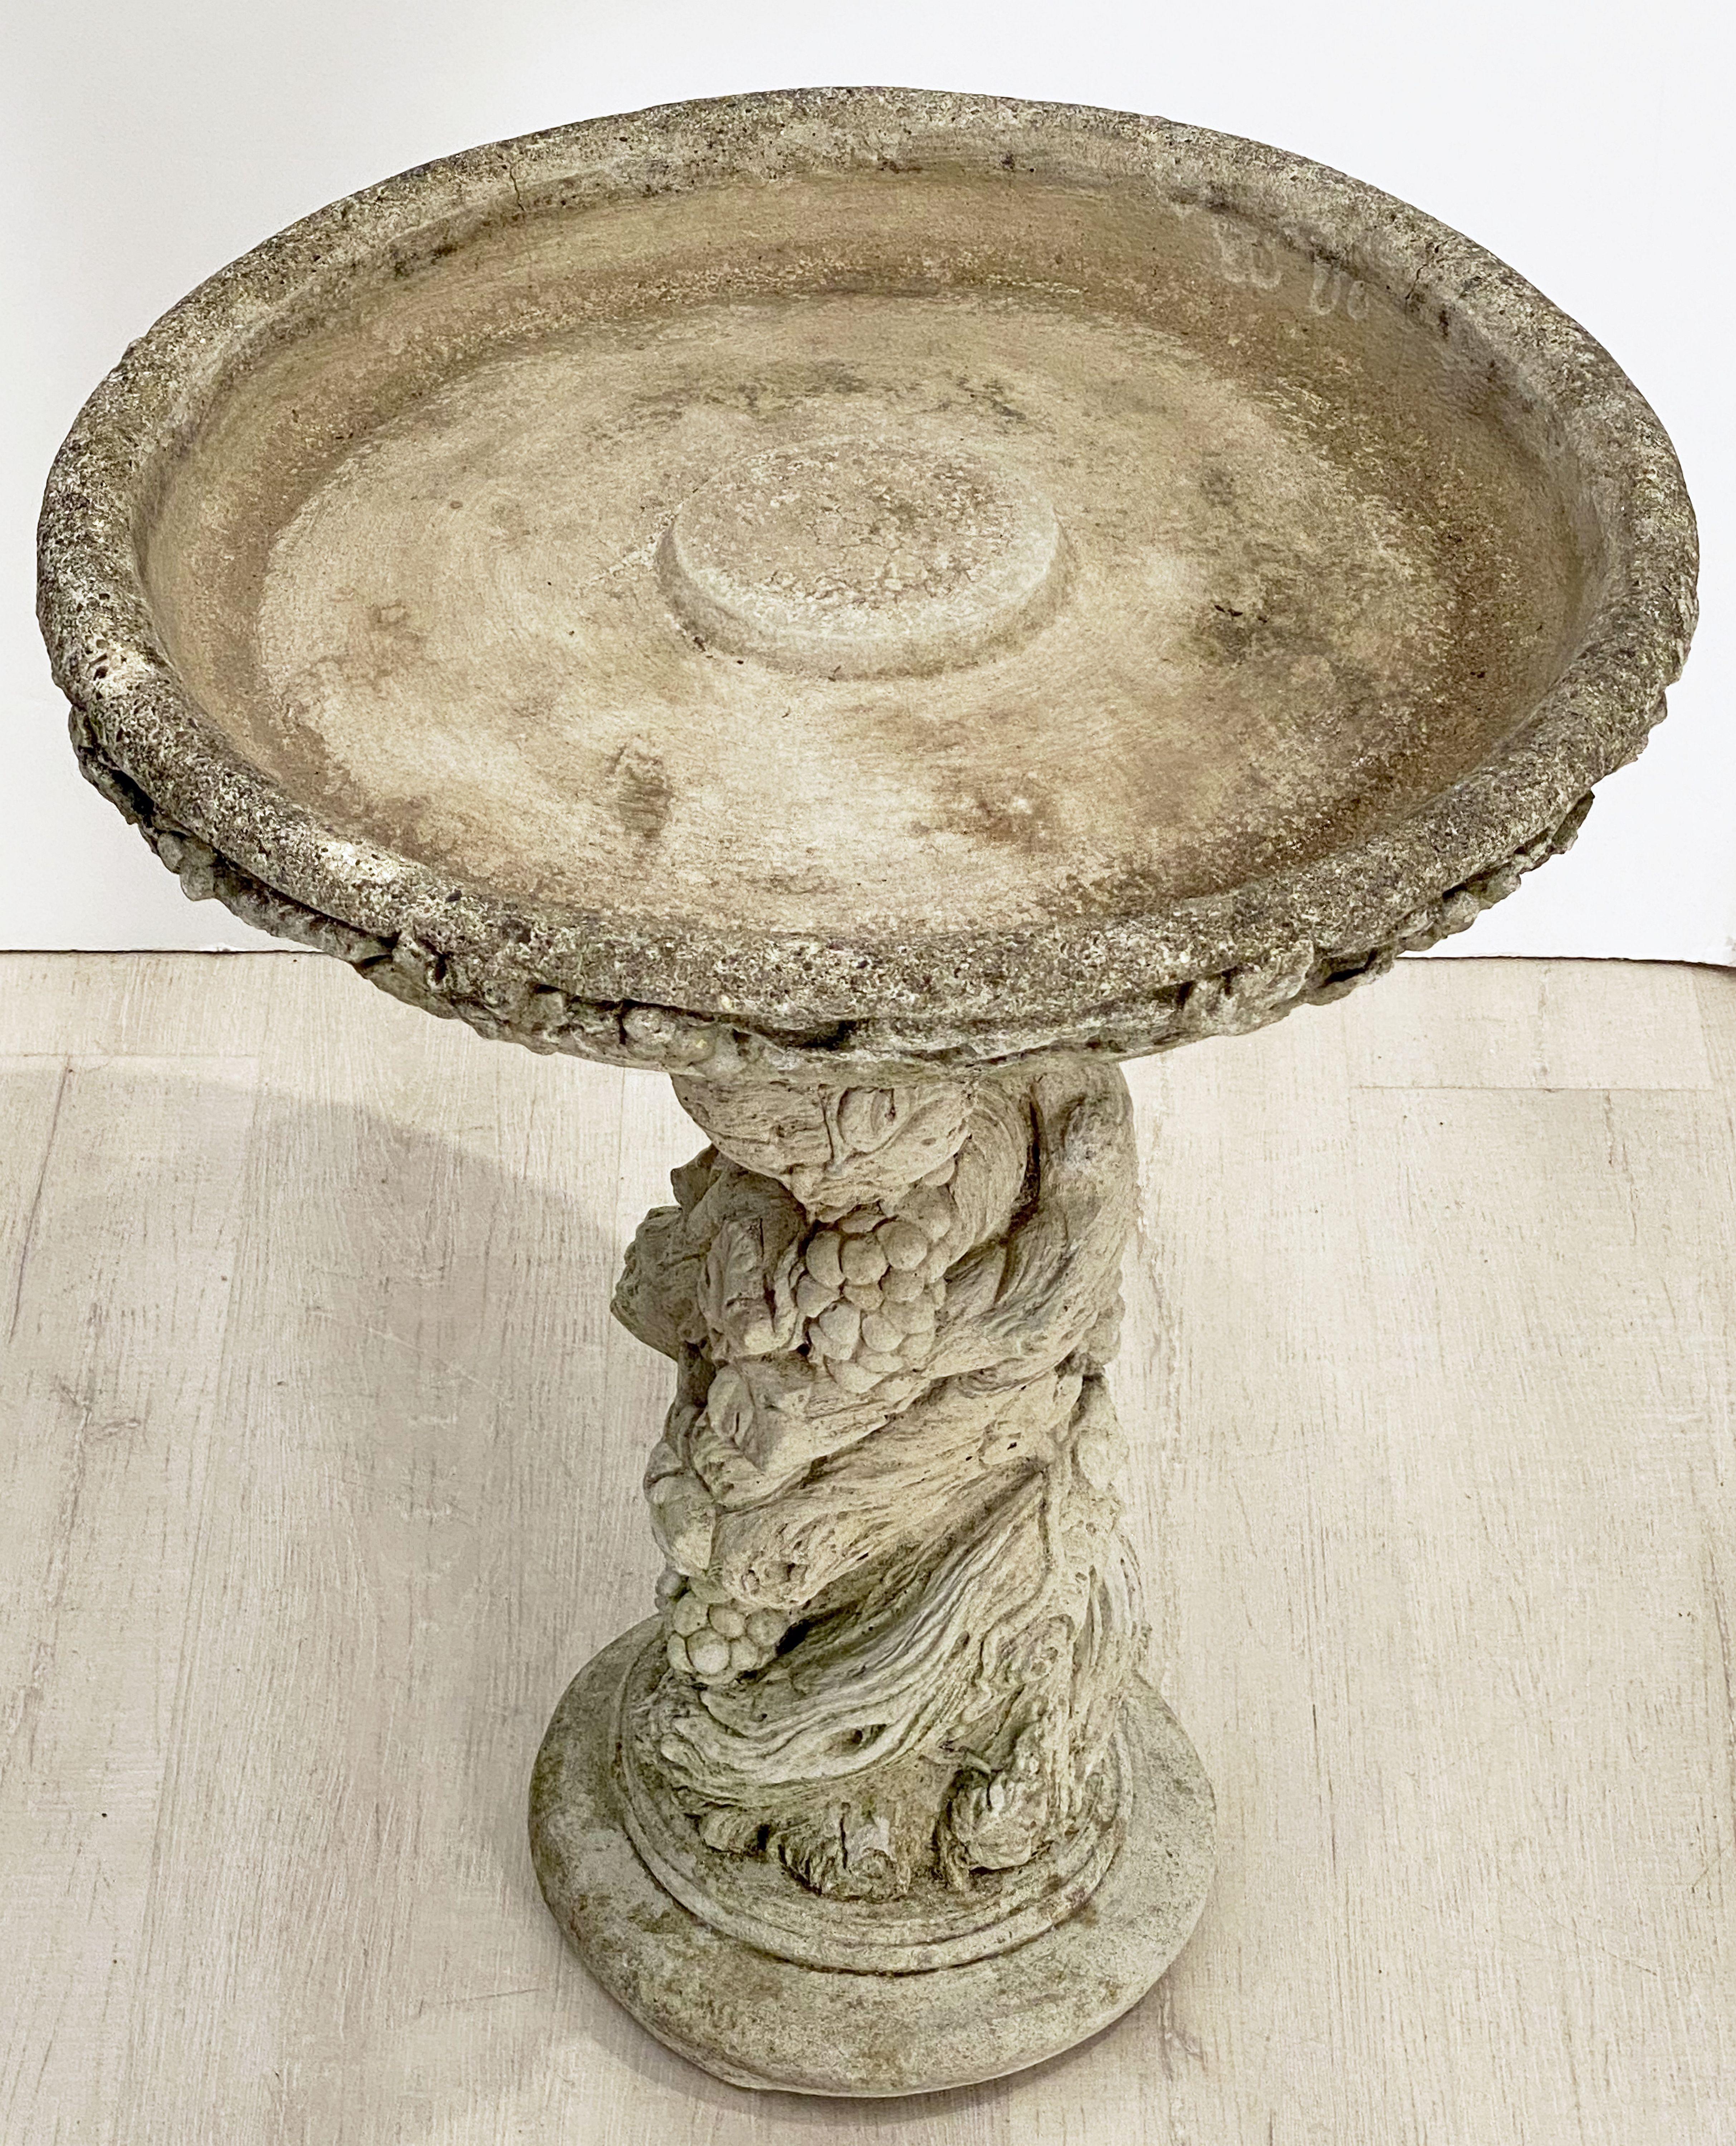 20th Century Large English Garden Stone Bird Bath with Faux Bois Relief